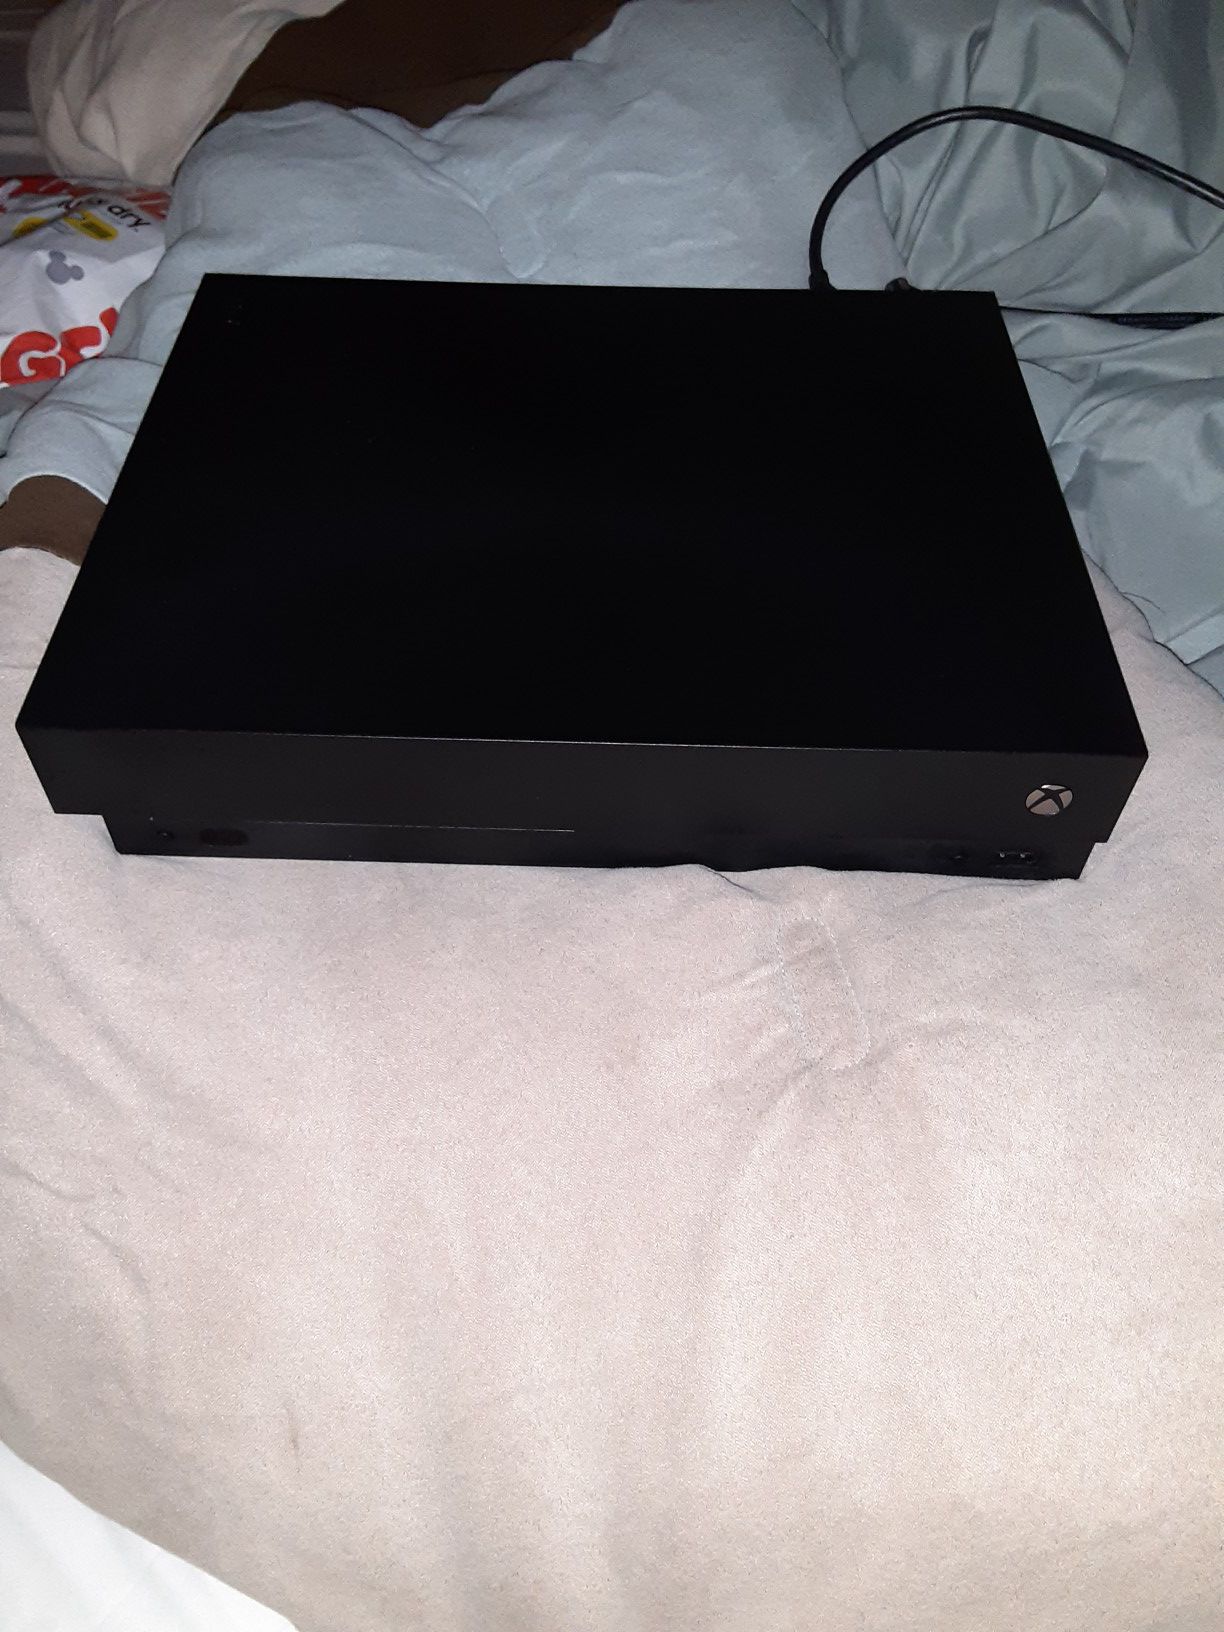 Xbox One with 5 games and 2 controllers